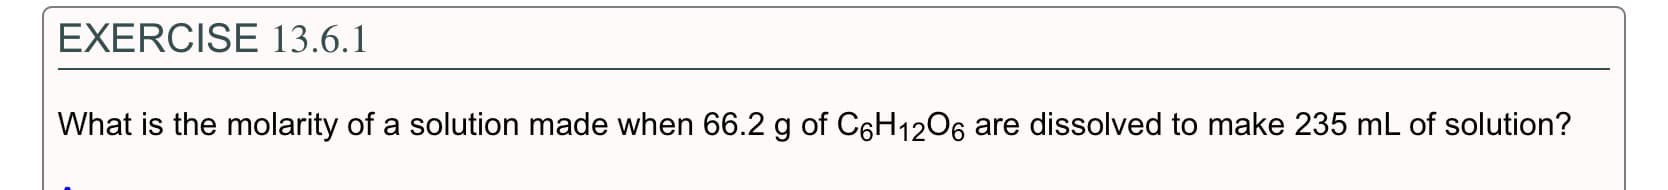 EXERCISE 13.6.1
What is the molarity of a solution made when 66.2 g of C6H12O6 are dissolved to make 235 mL of solution?
